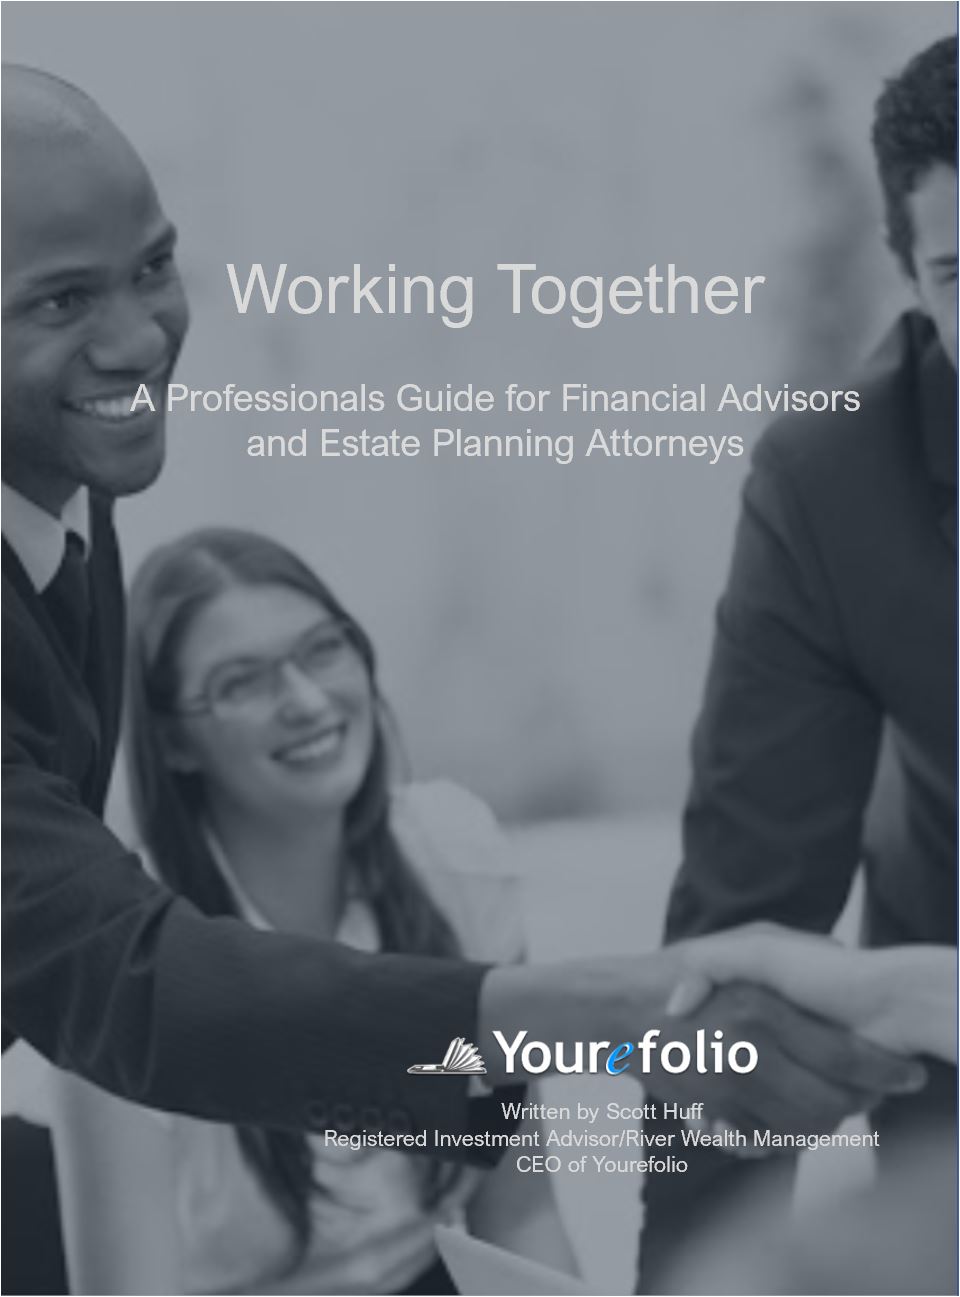 Financial Advisors and Estate Planning Attorneys Guide to Working Together